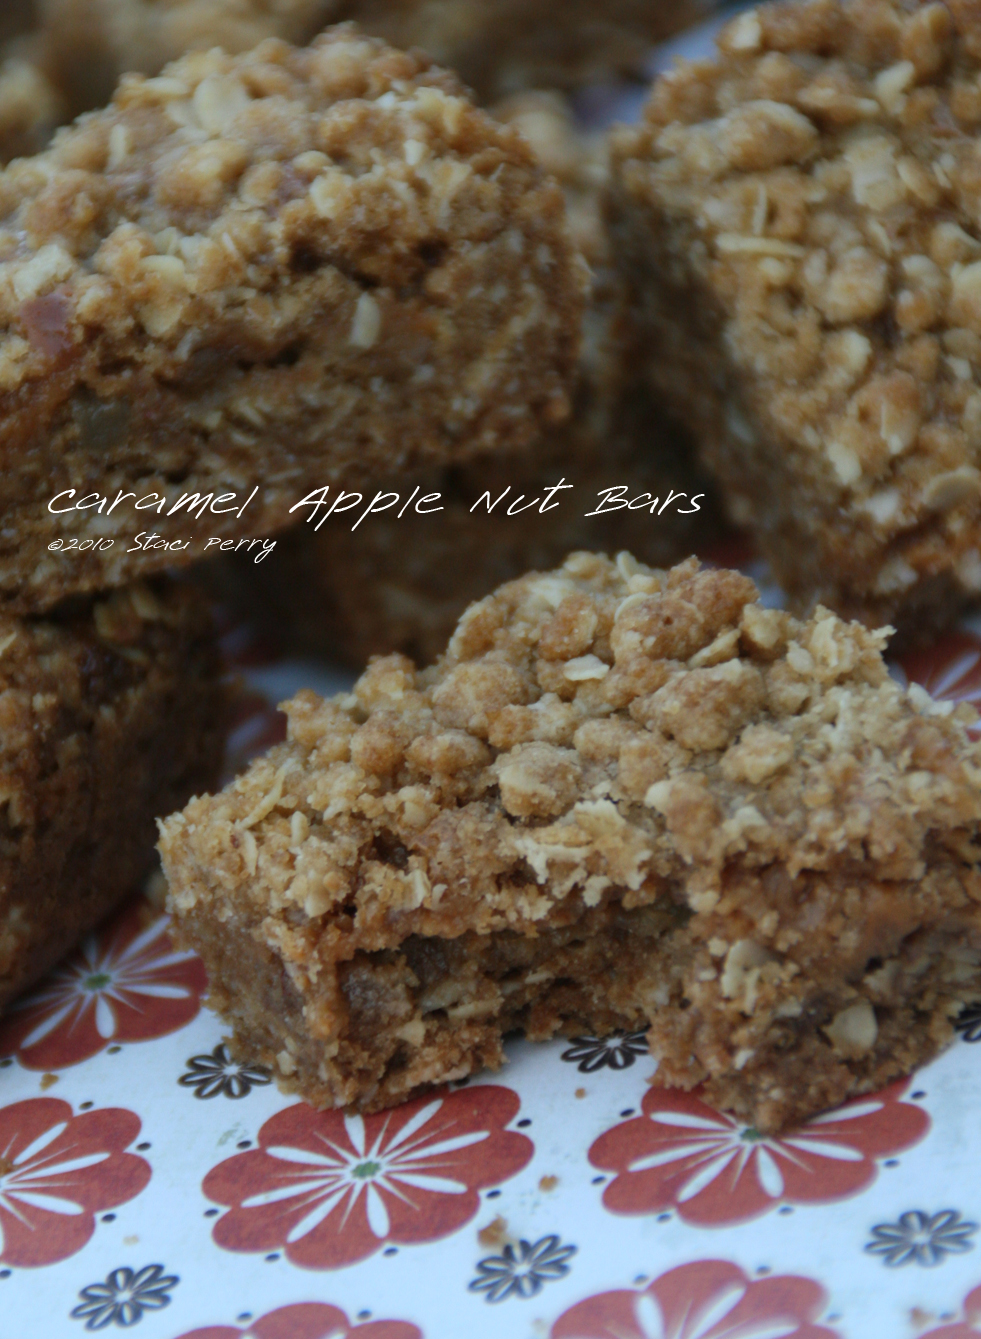 After Your Trip to the Orchard, Make Caramel Apple Nut Bars